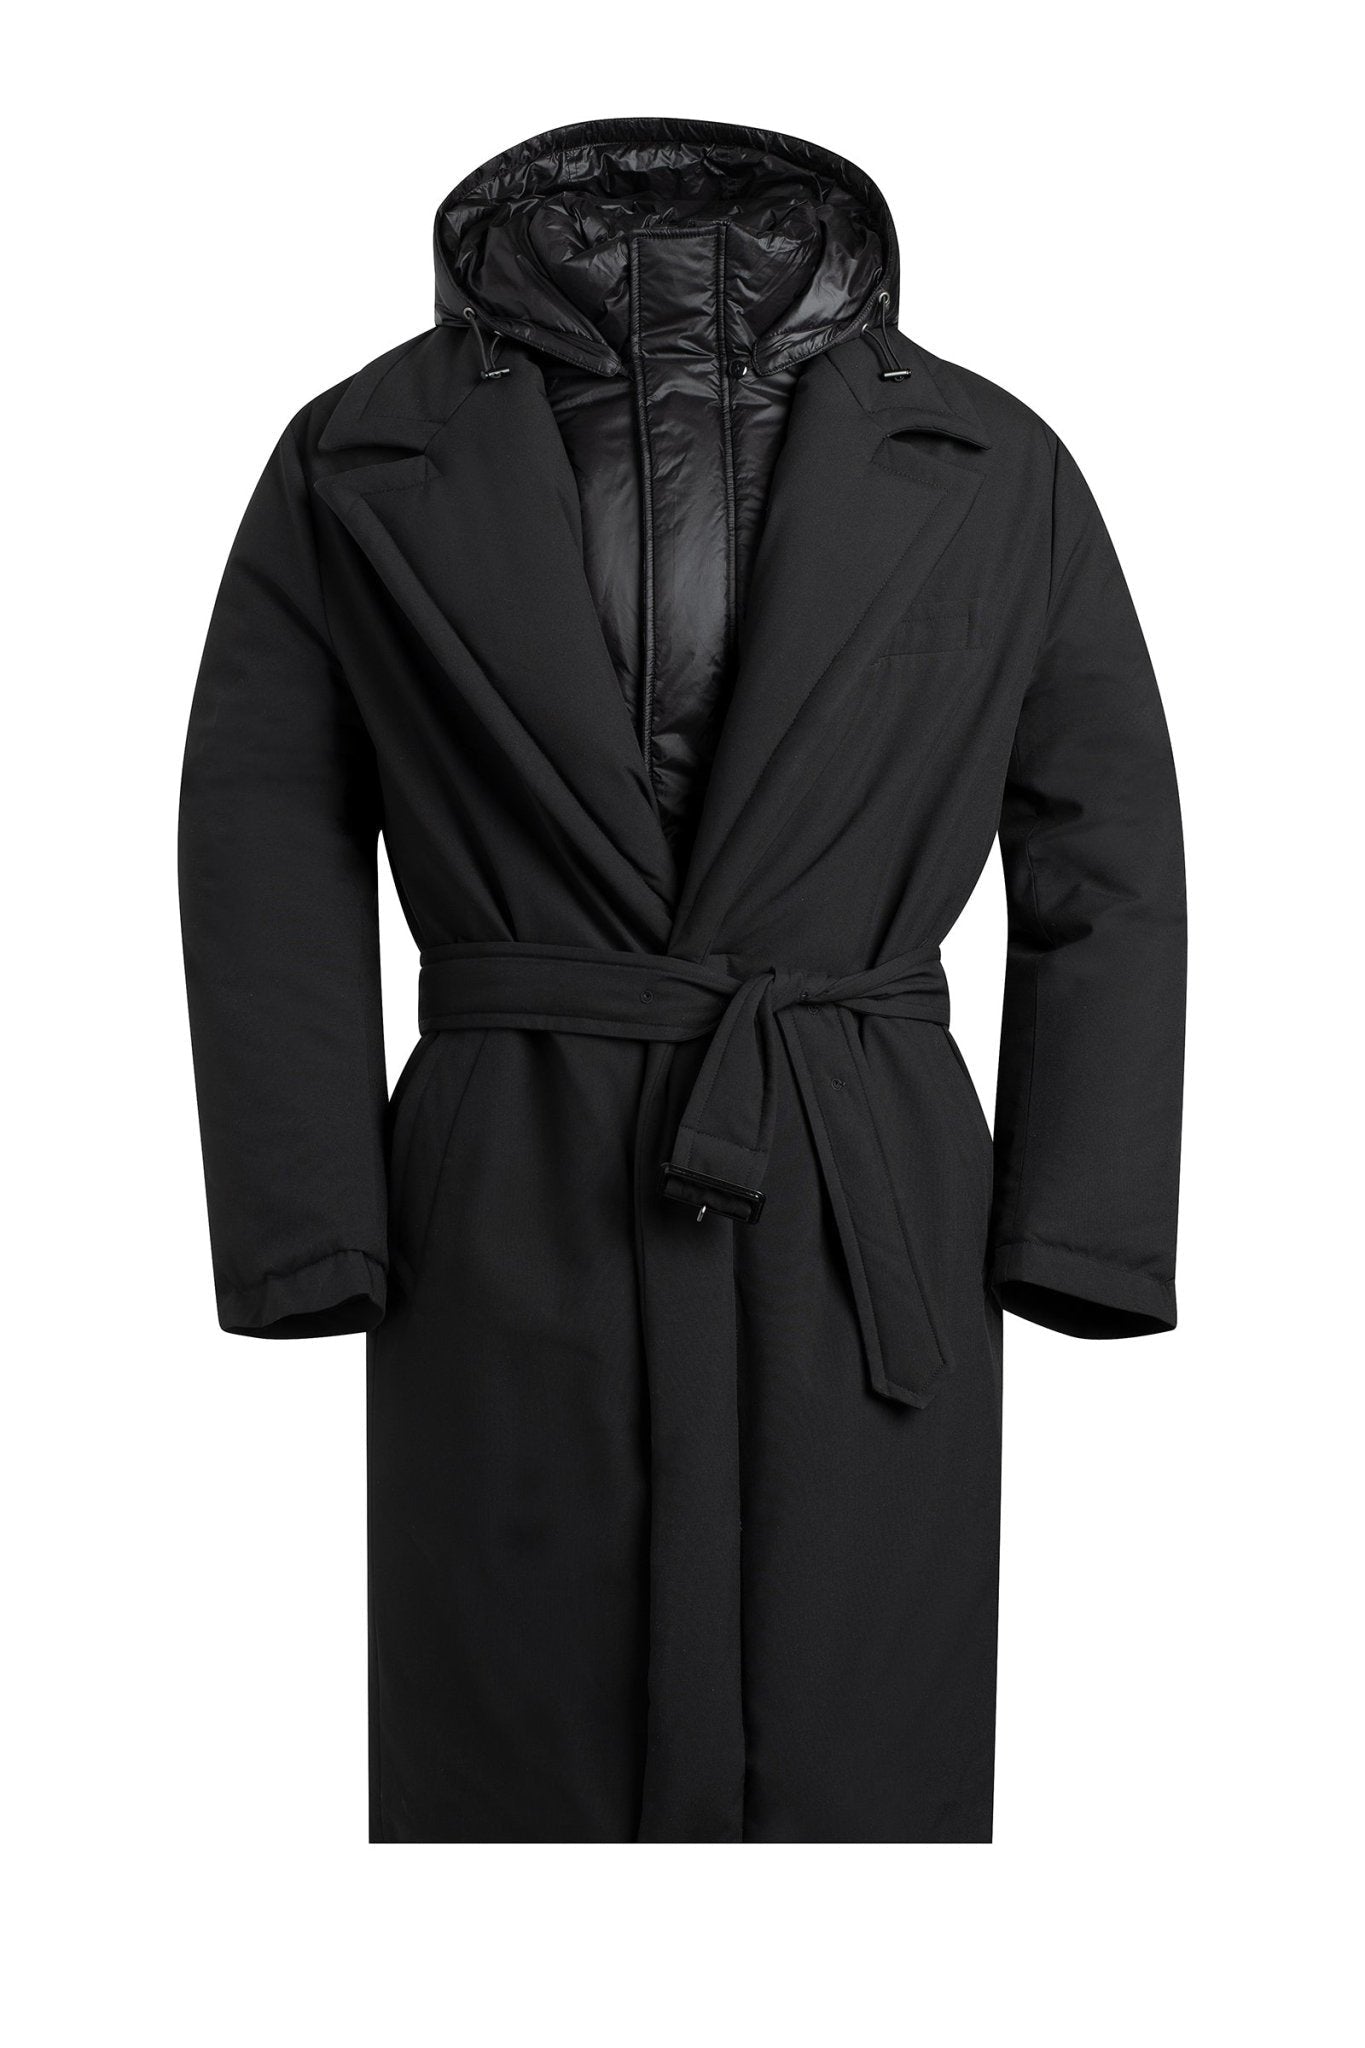 TYLER BLACK TRENCH COAT WITH PRIMALOFT LINING